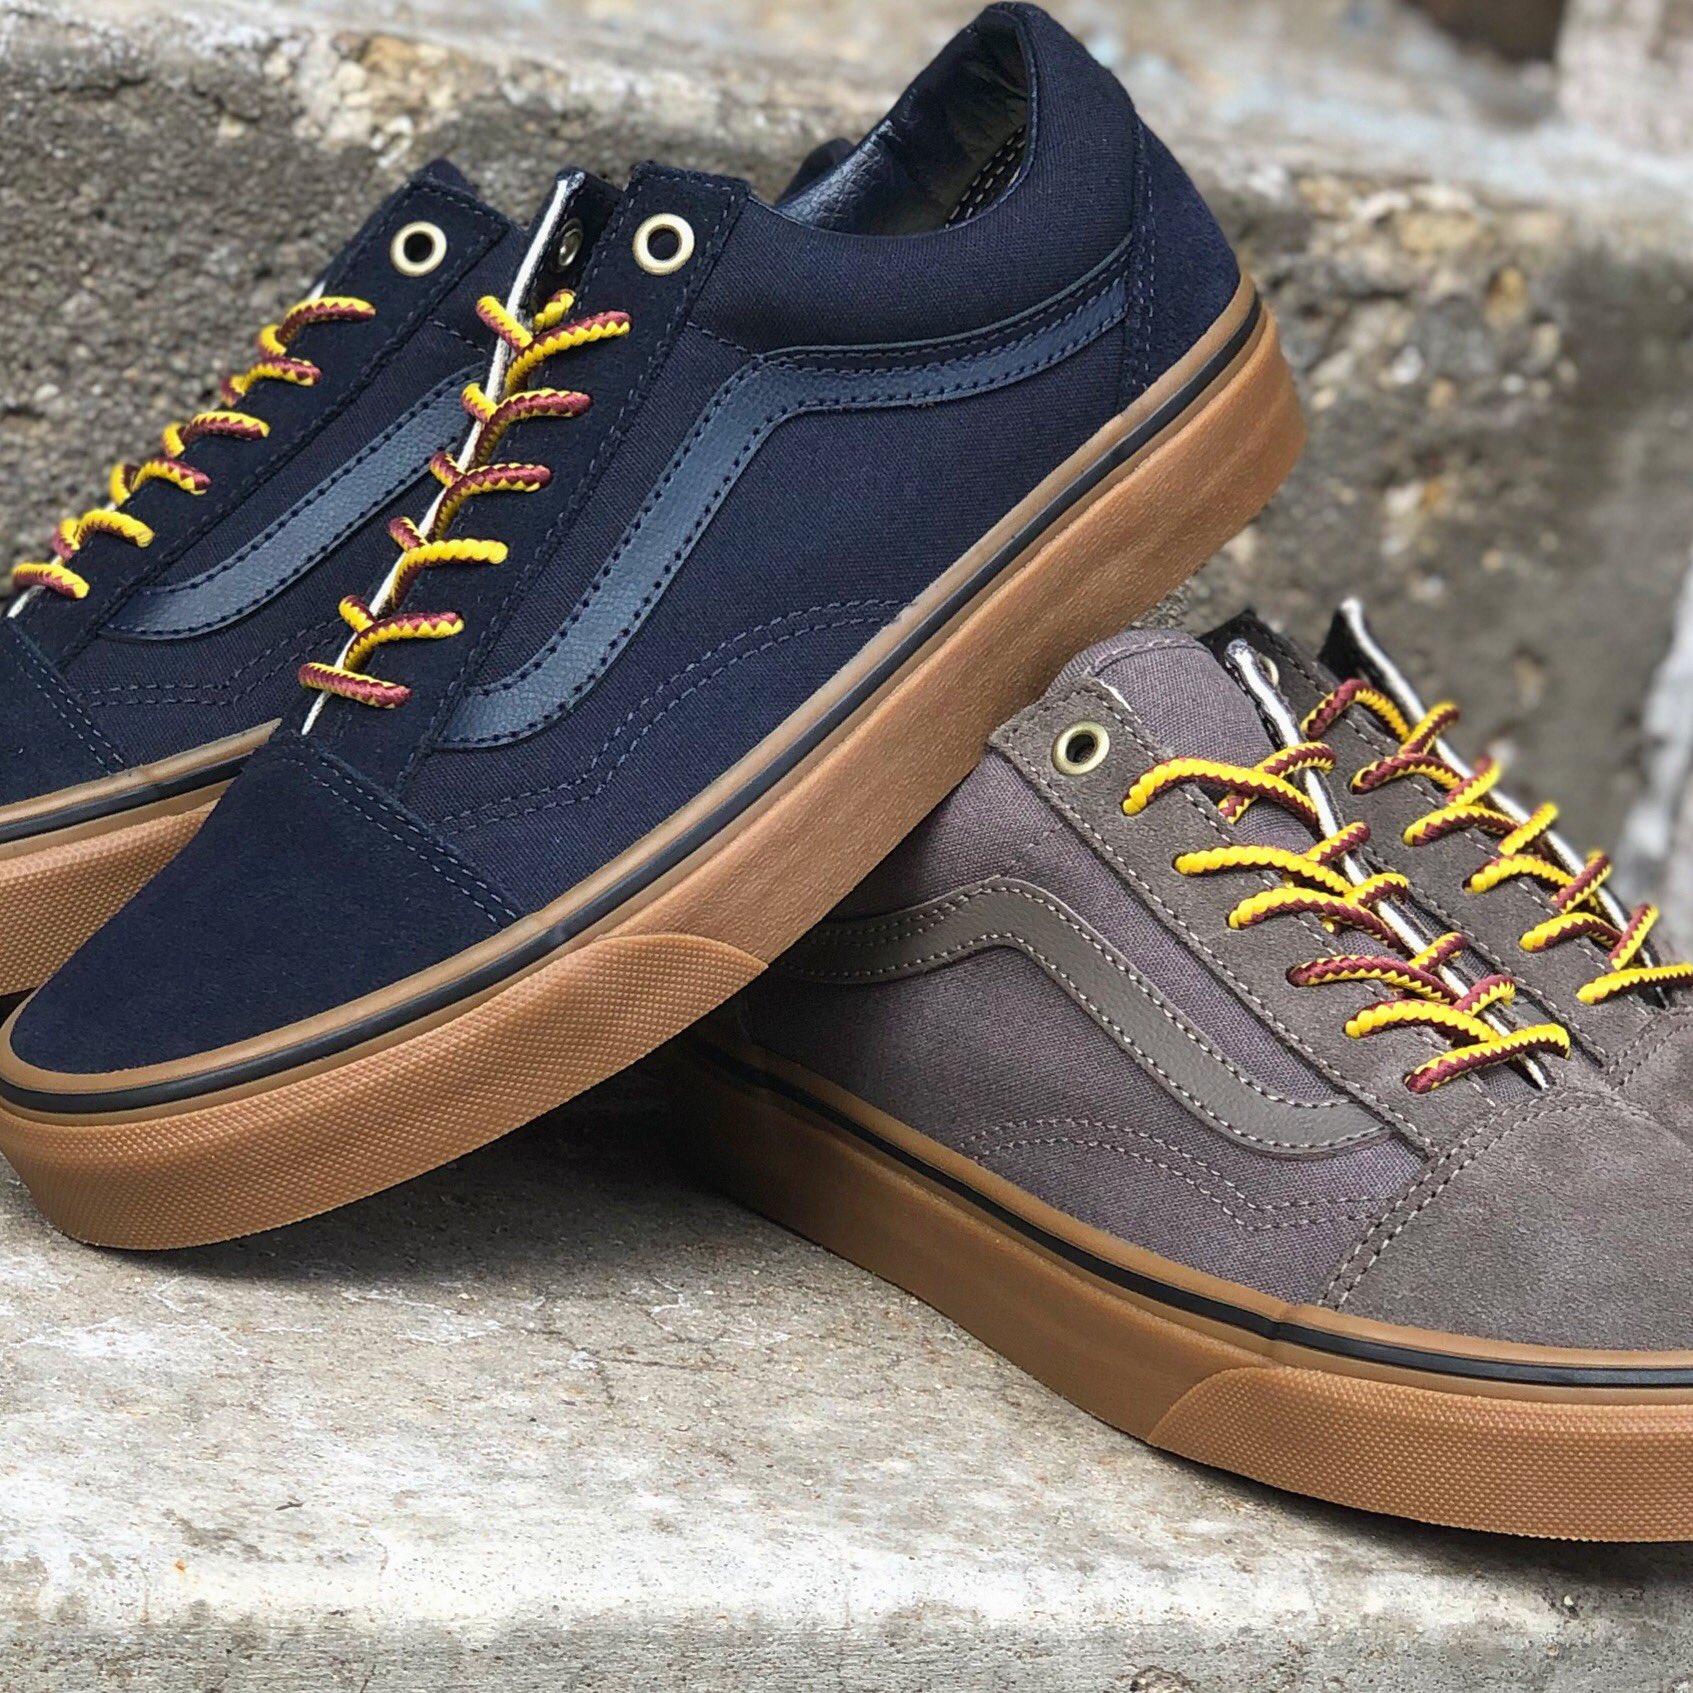 MODA3 on "New Arrival // @vans // Skool // Gum Sole Pack // Navy or Grey // US Men's Sizes 6-13 // Stop in-store or click the link to cop!